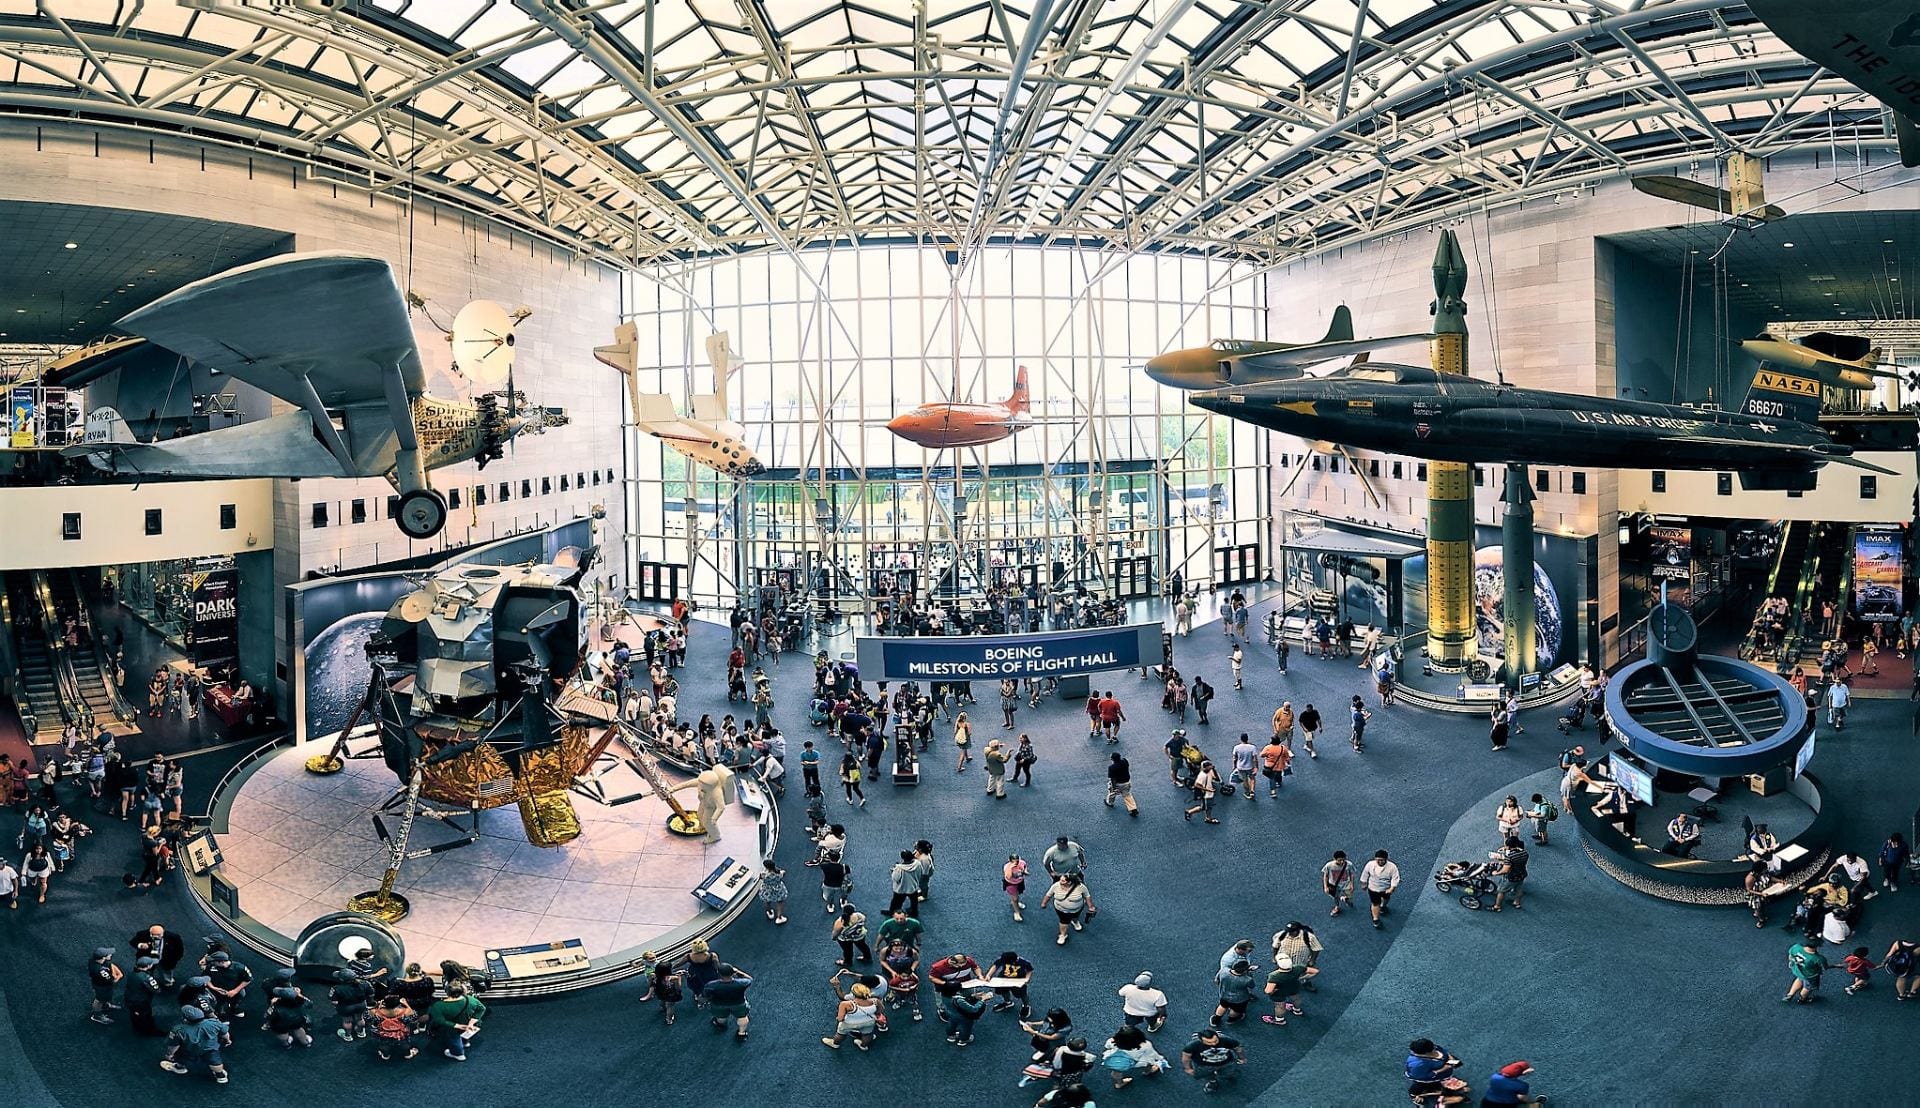 National air and space museum